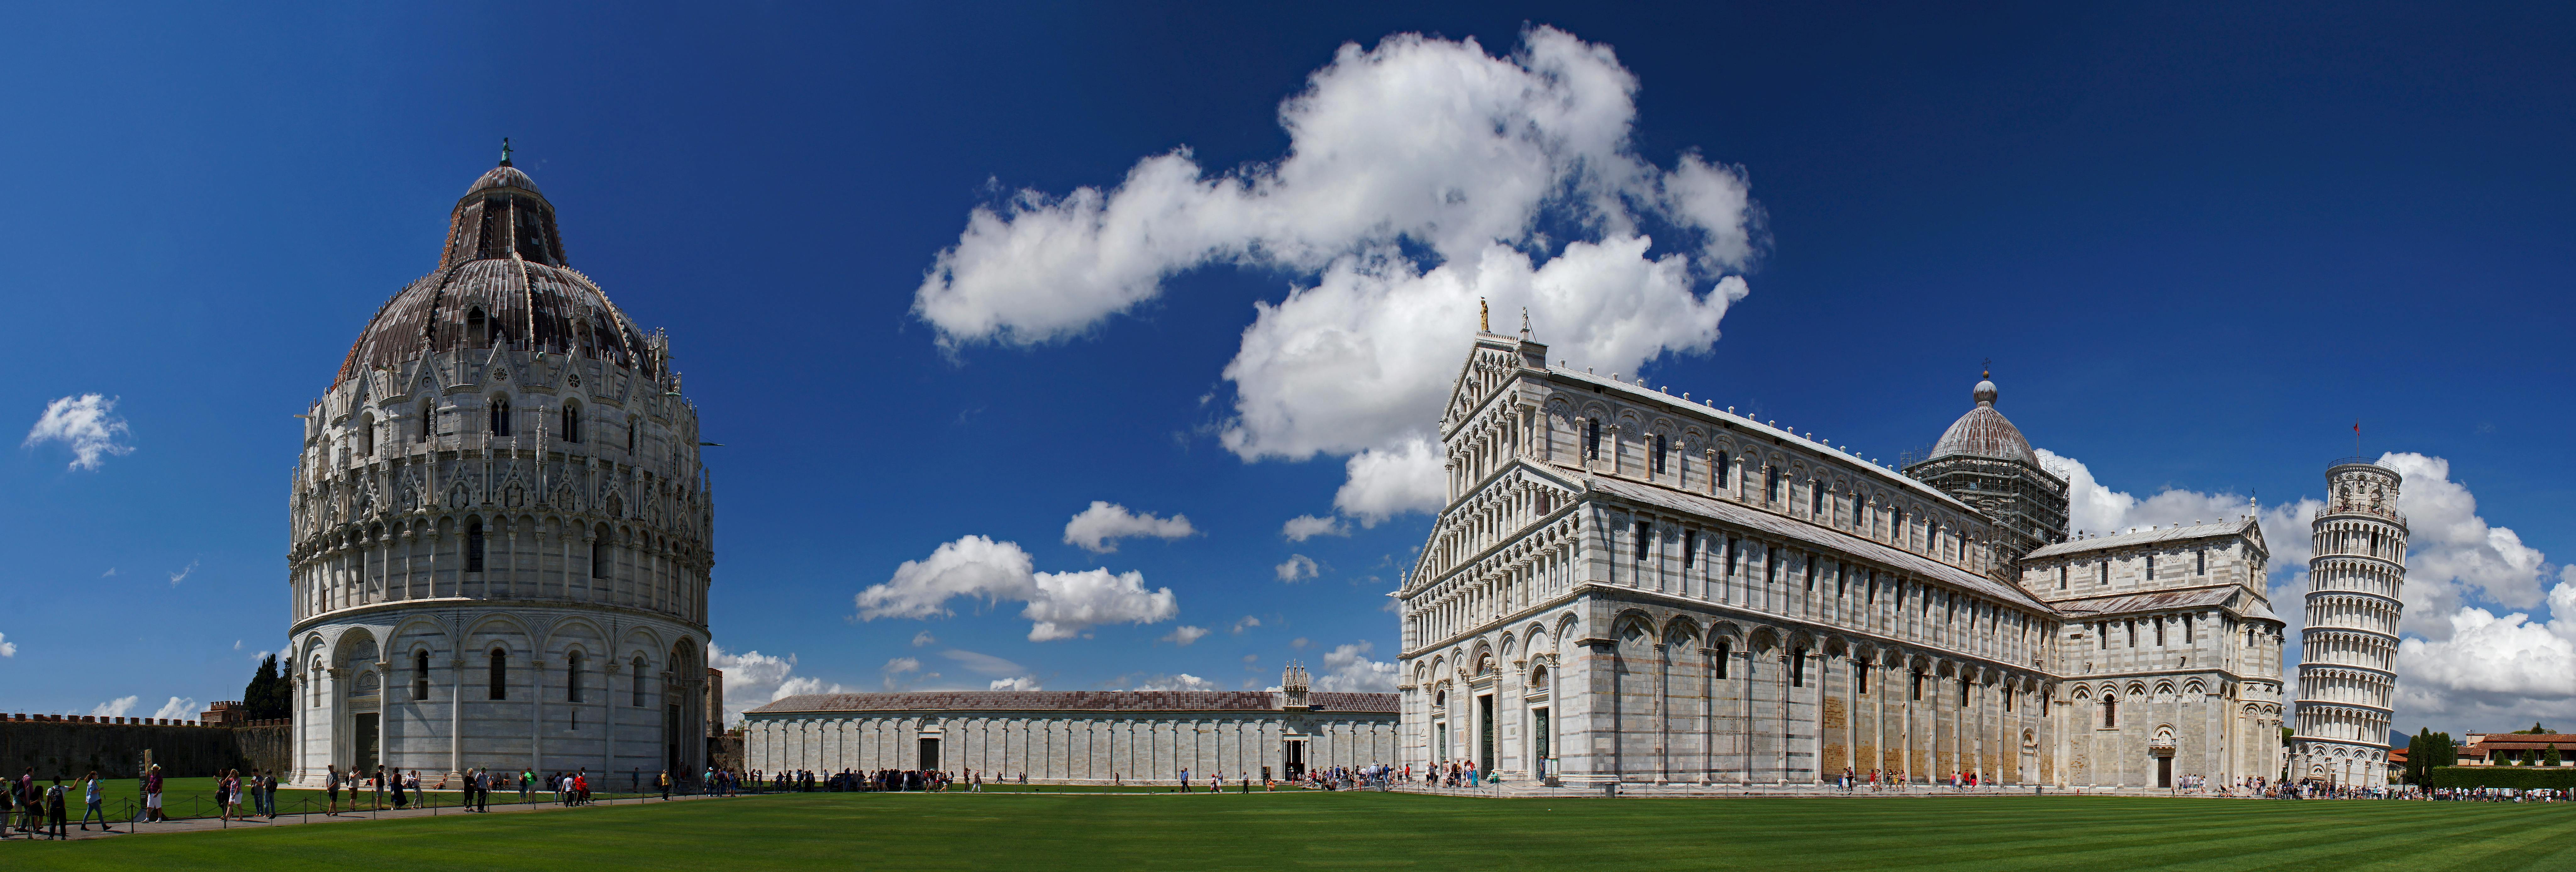 7 Wonders of Pisa exploration game and tour